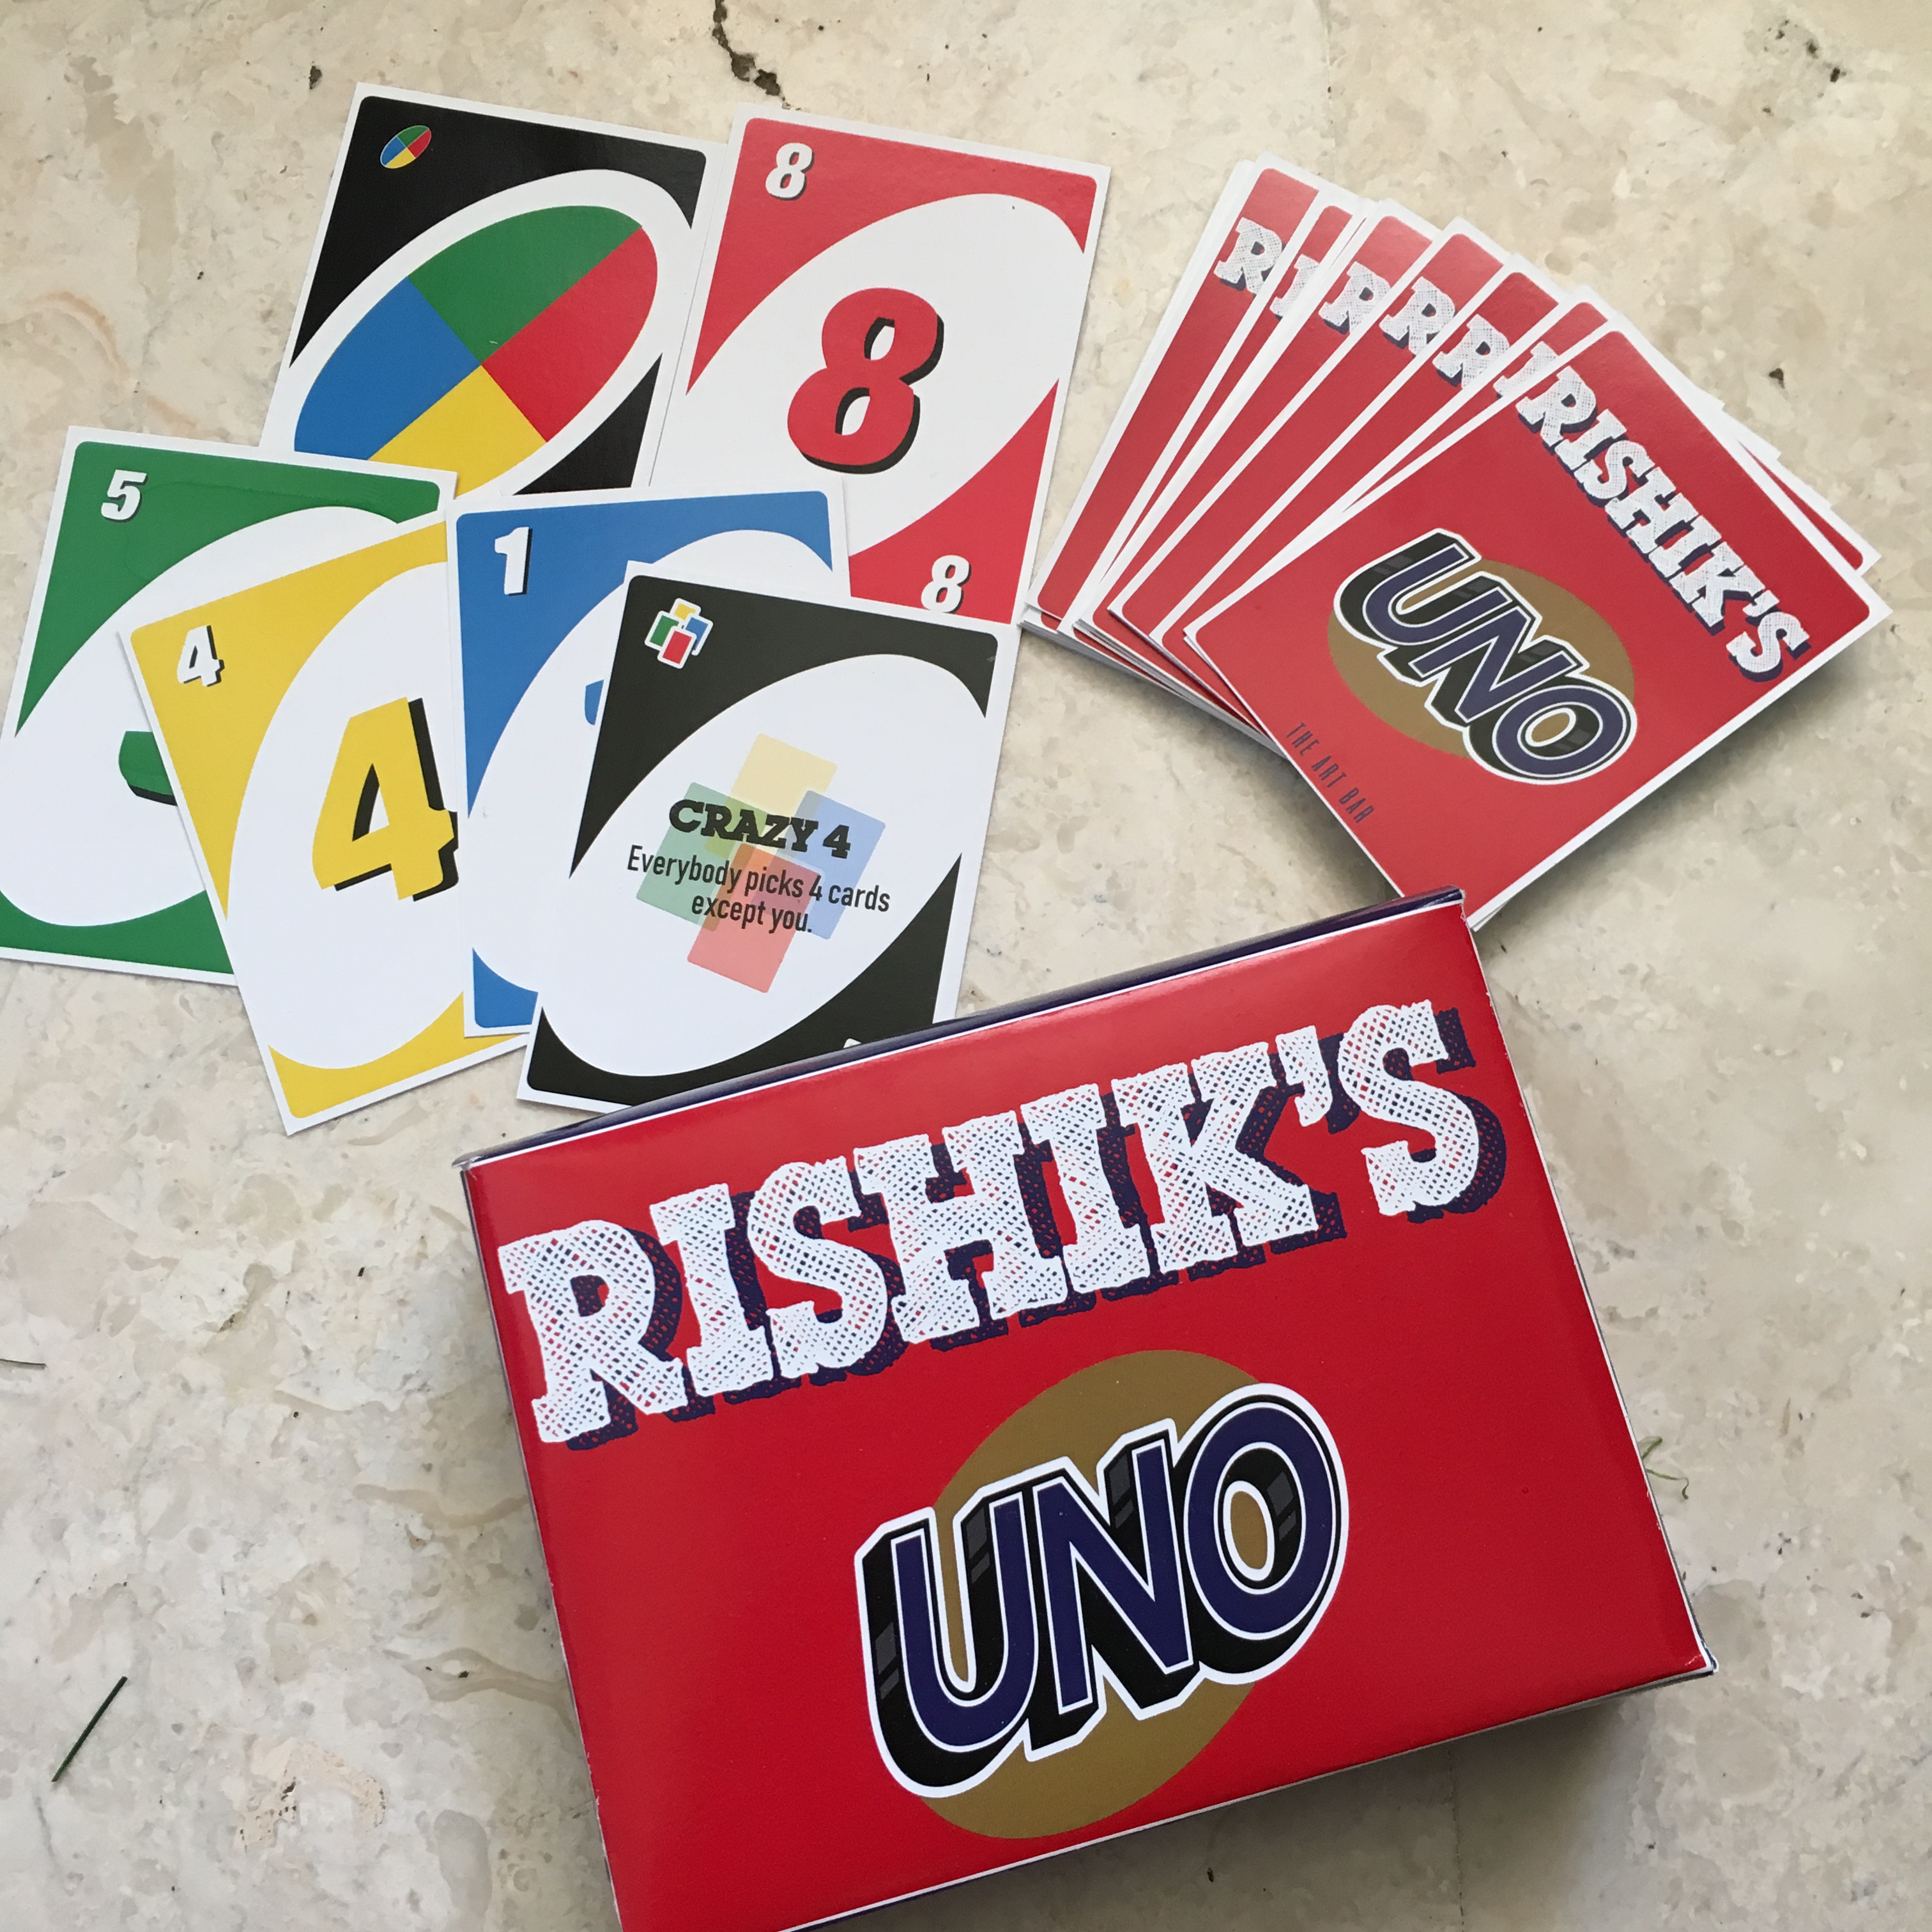 Personalised Uno